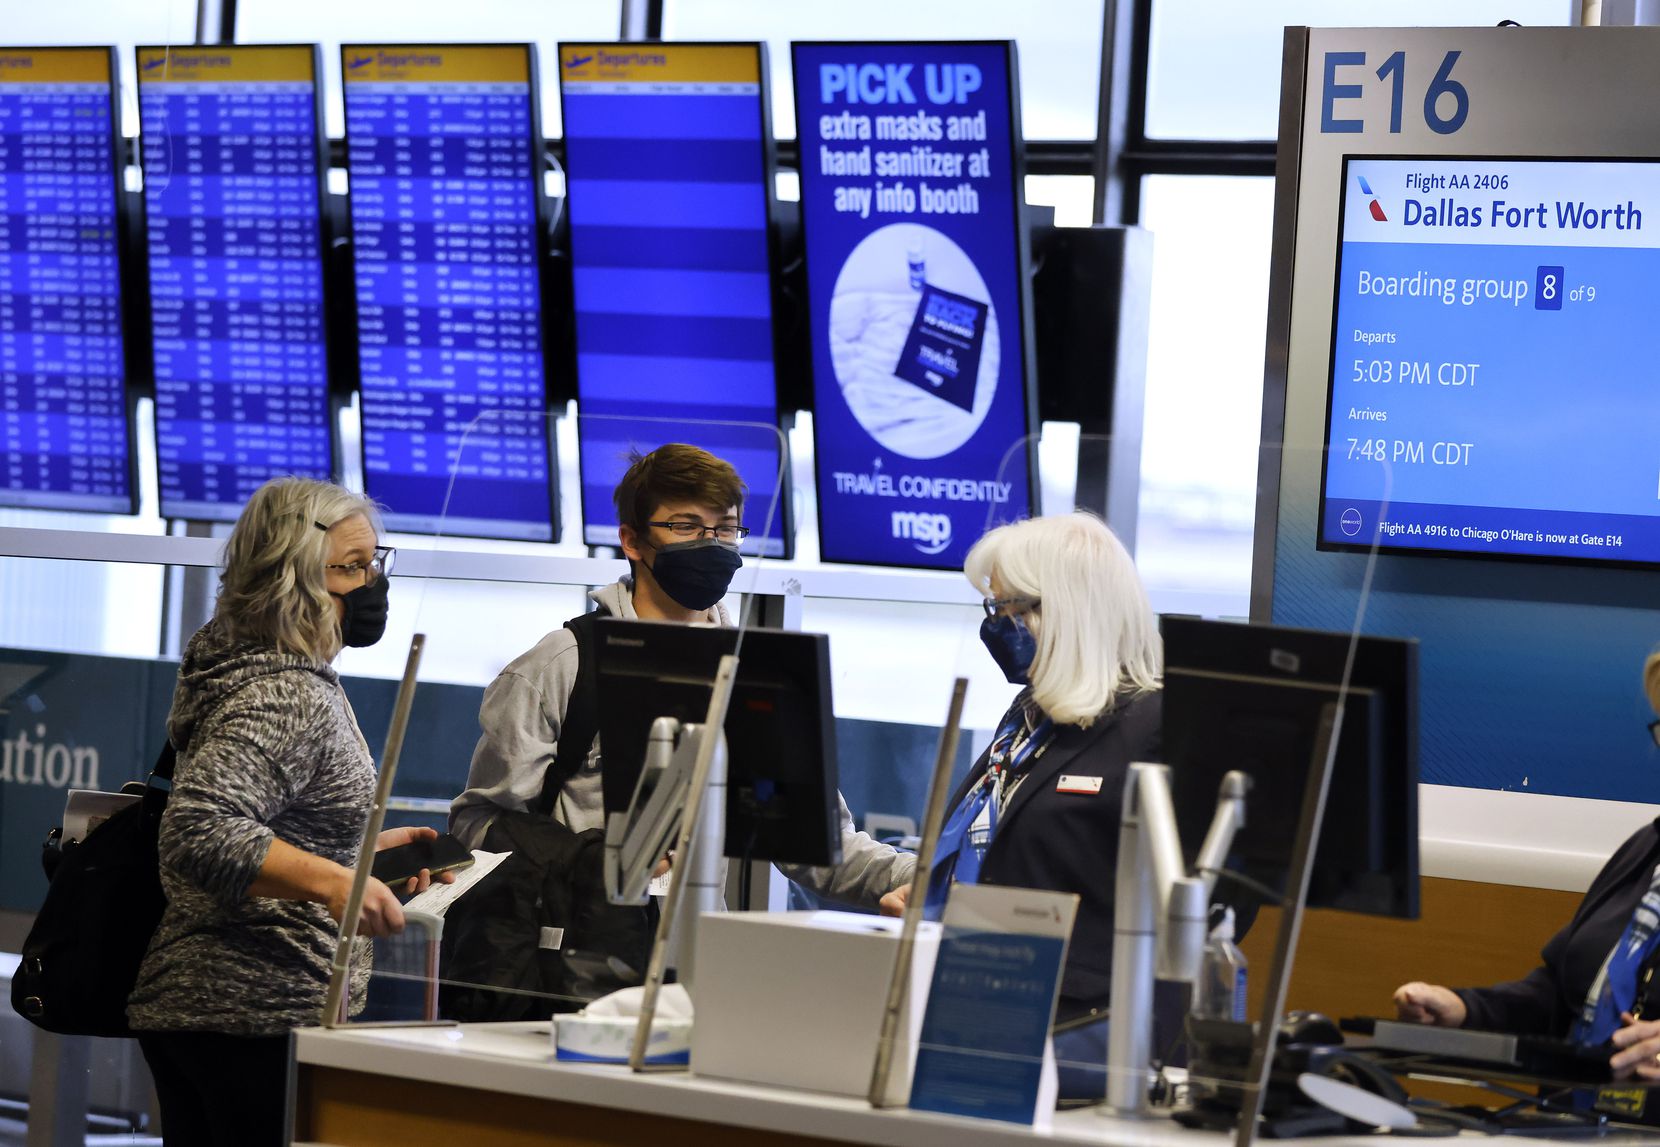 American Airlines passengers board a flight to DFW Airport from Terminal E at Minneapolis...